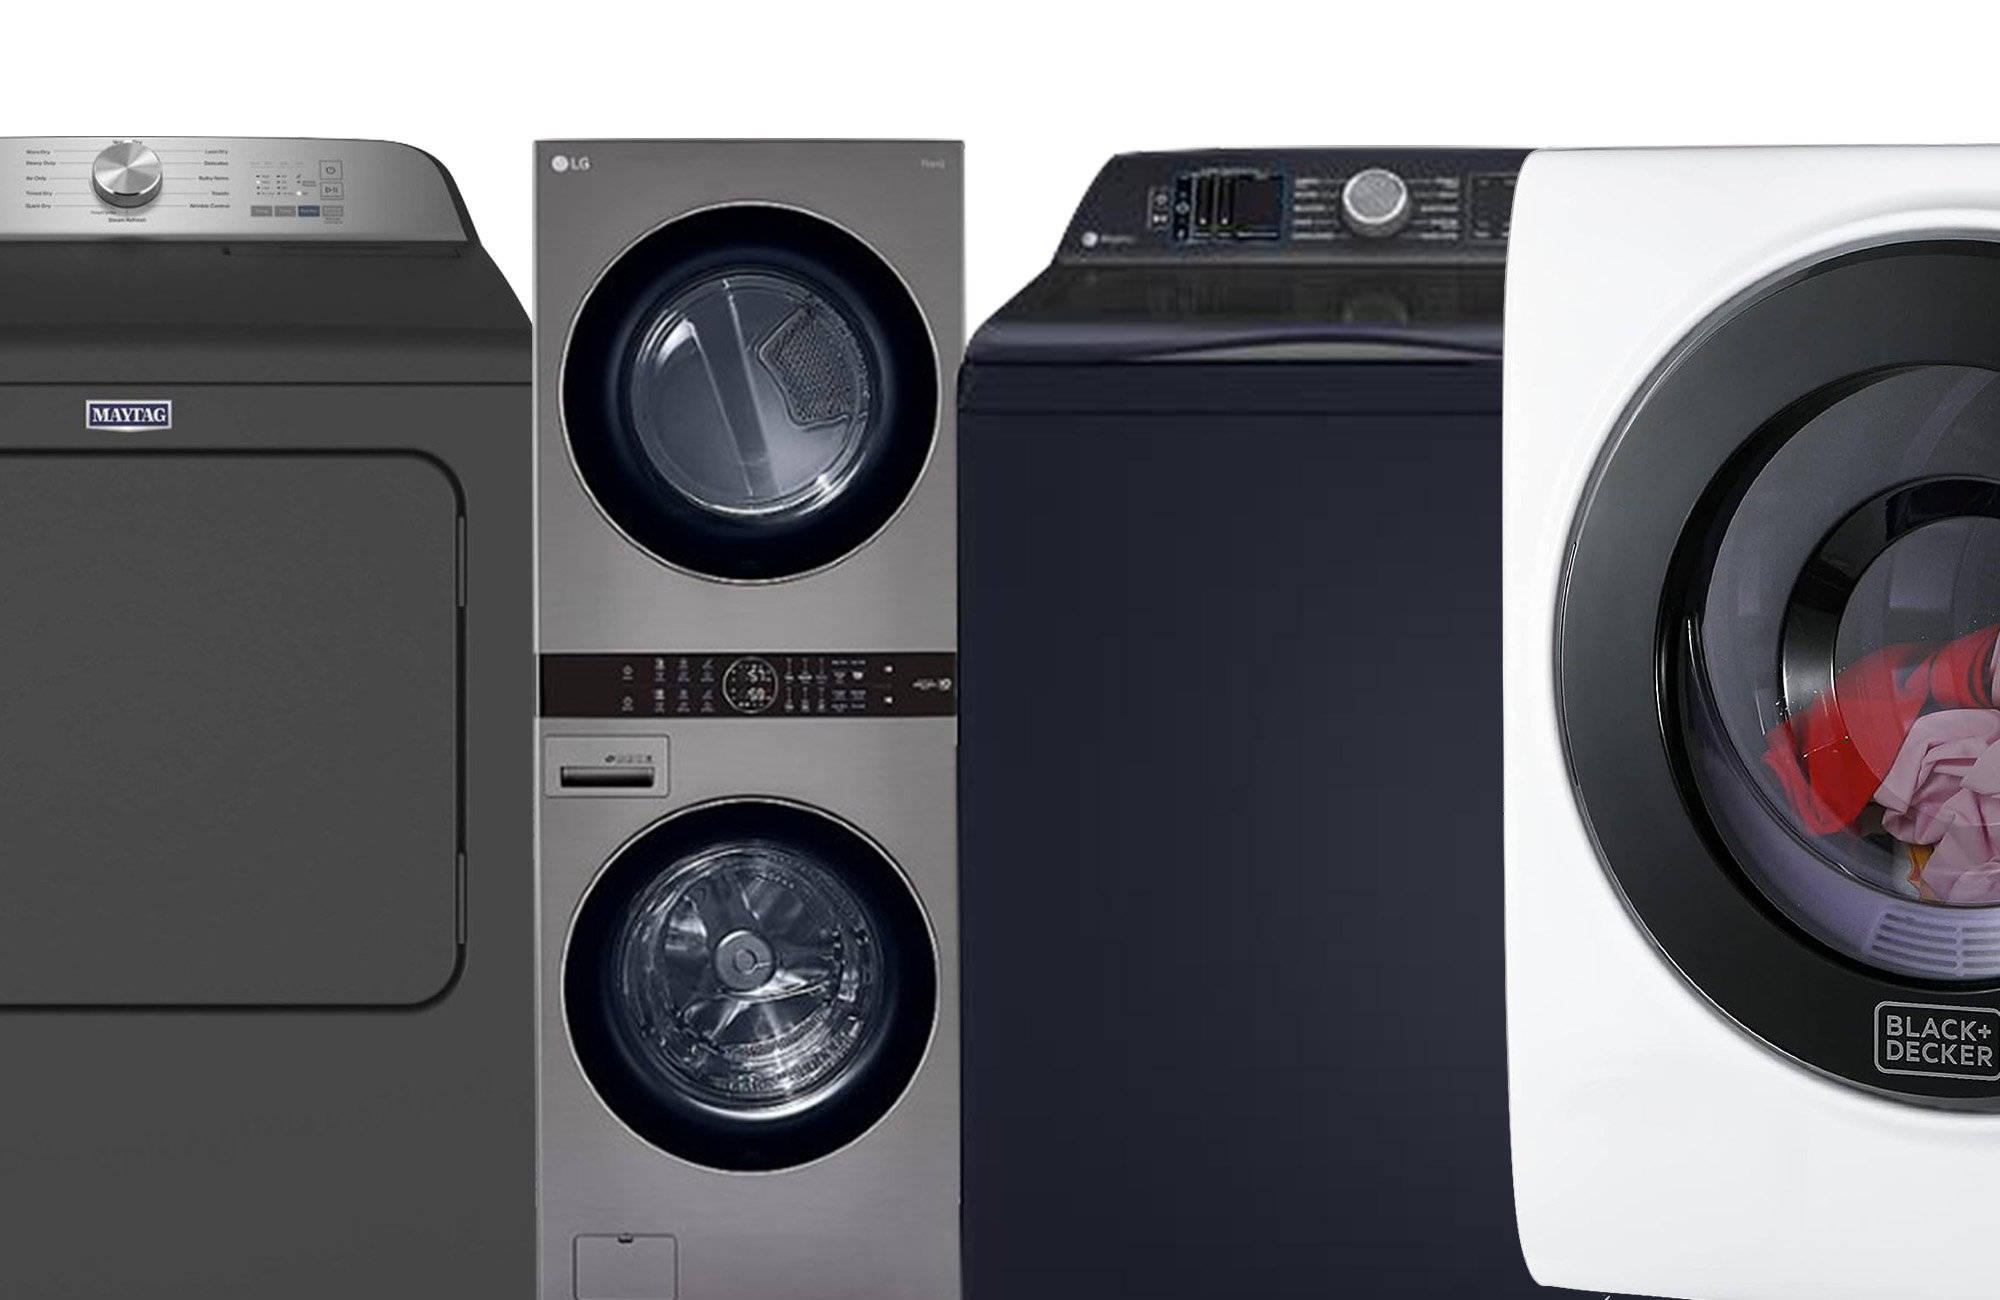 5 Best Portable Washing Machines & Dryer - You Need To Have 